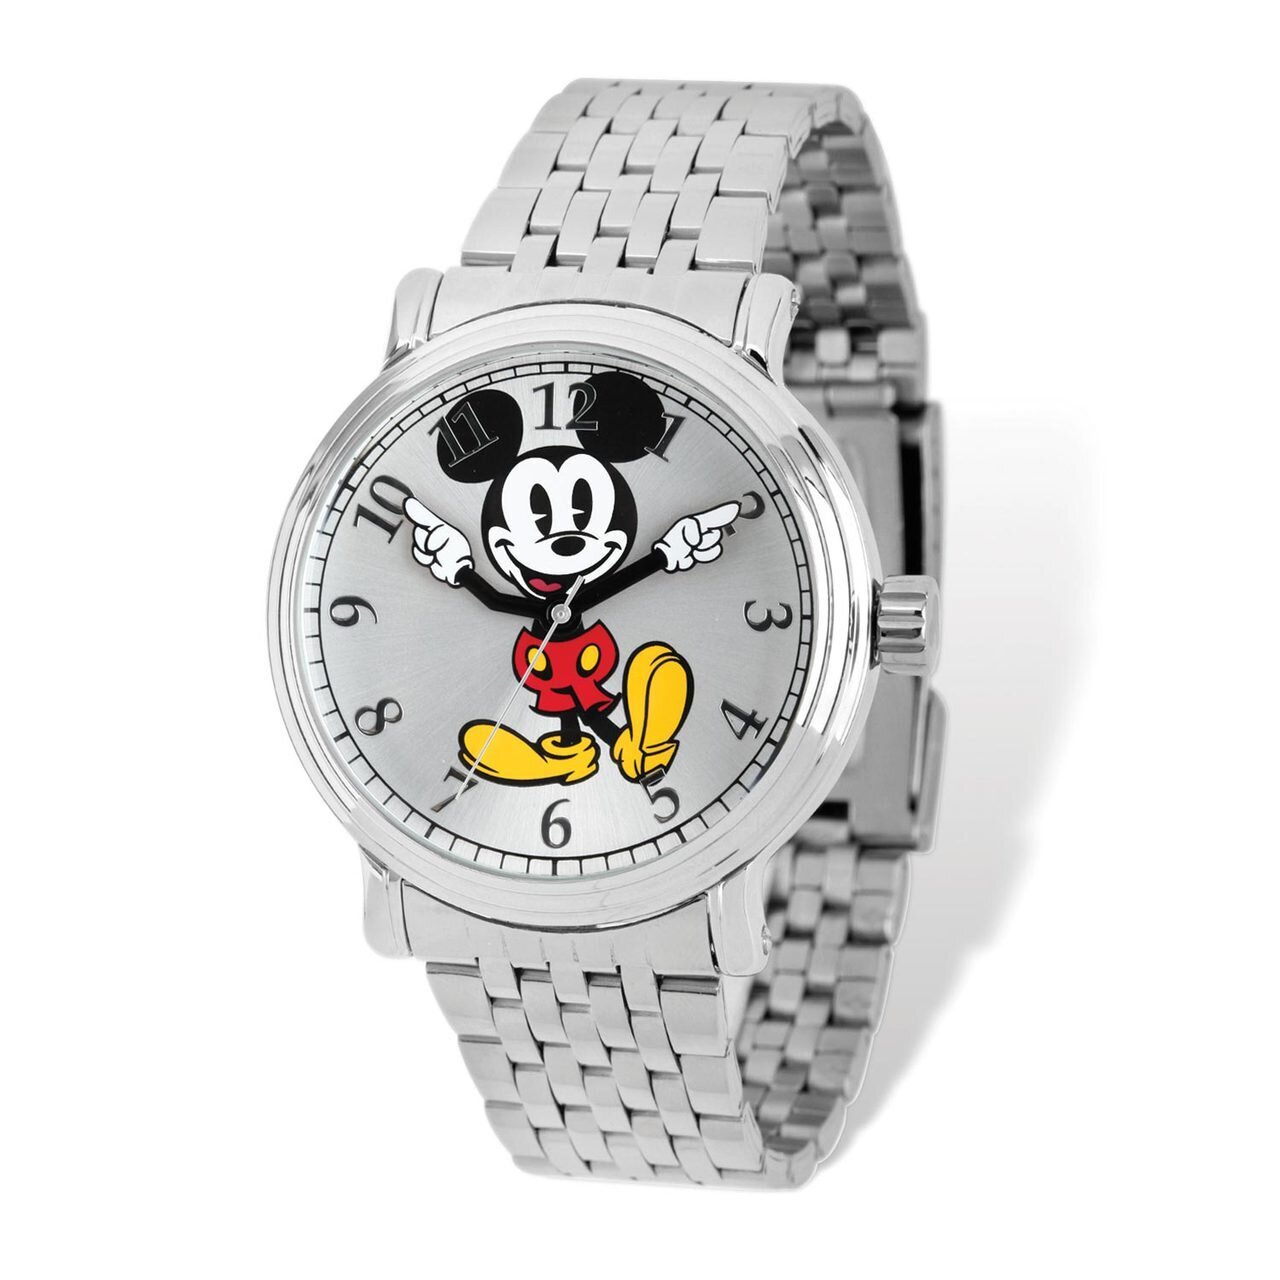 Disney Silver Dial Mickey Mouse Watch Adult Size XWA5152